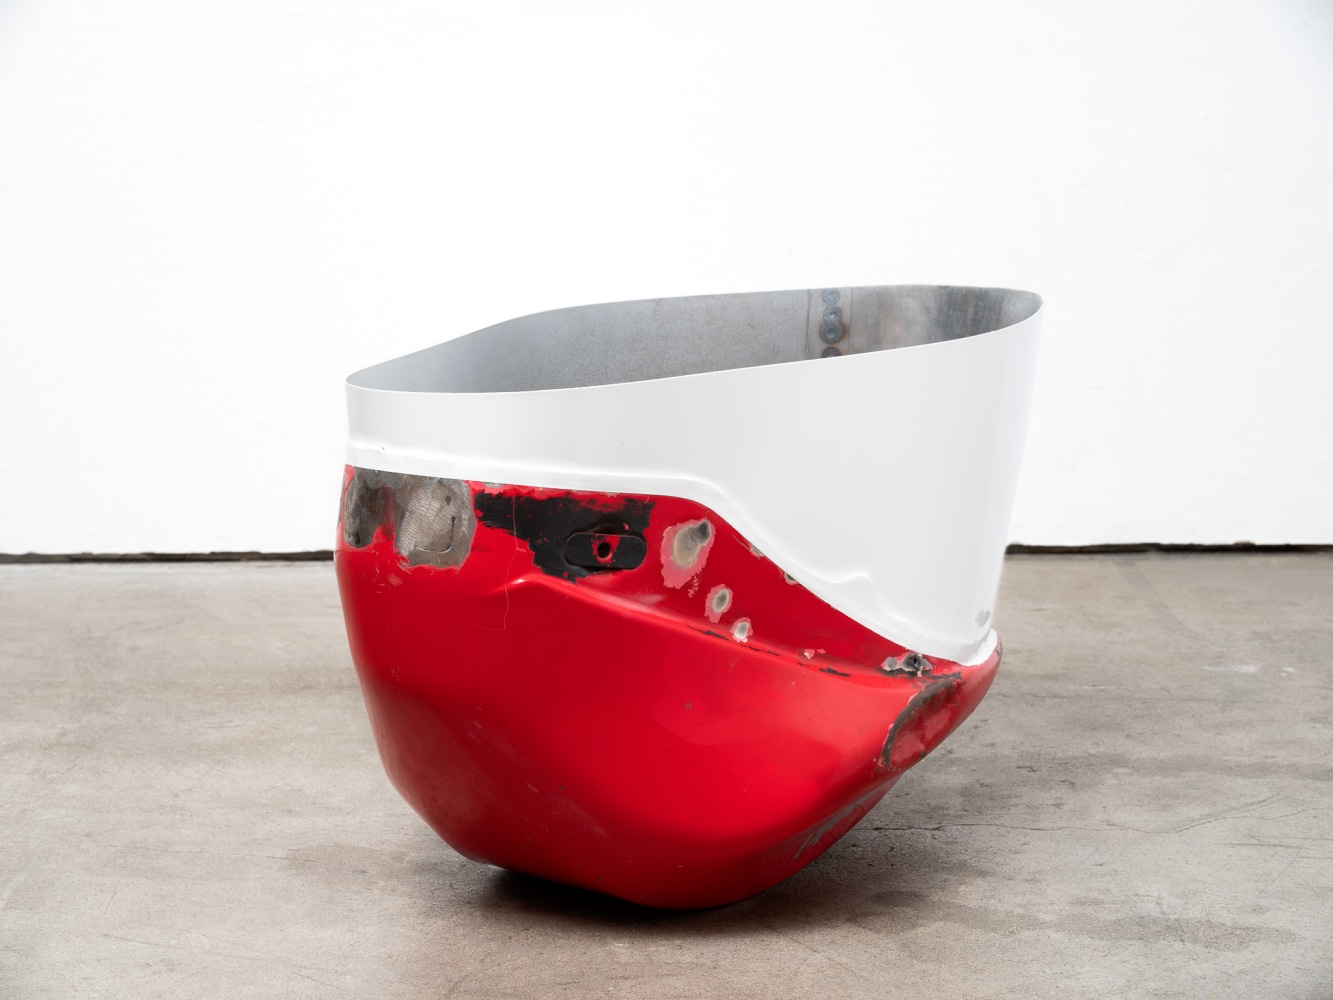 Elad Lassry

Untitled (Carrier, Red)

2019

Welded and painted steel

24 1/2 x 13 1/4 x 15 inches (62.2 x 33.7 x 38.1 cm)

Unique

EL 515

$35,000

&amp;nbsp;

INQUIRE